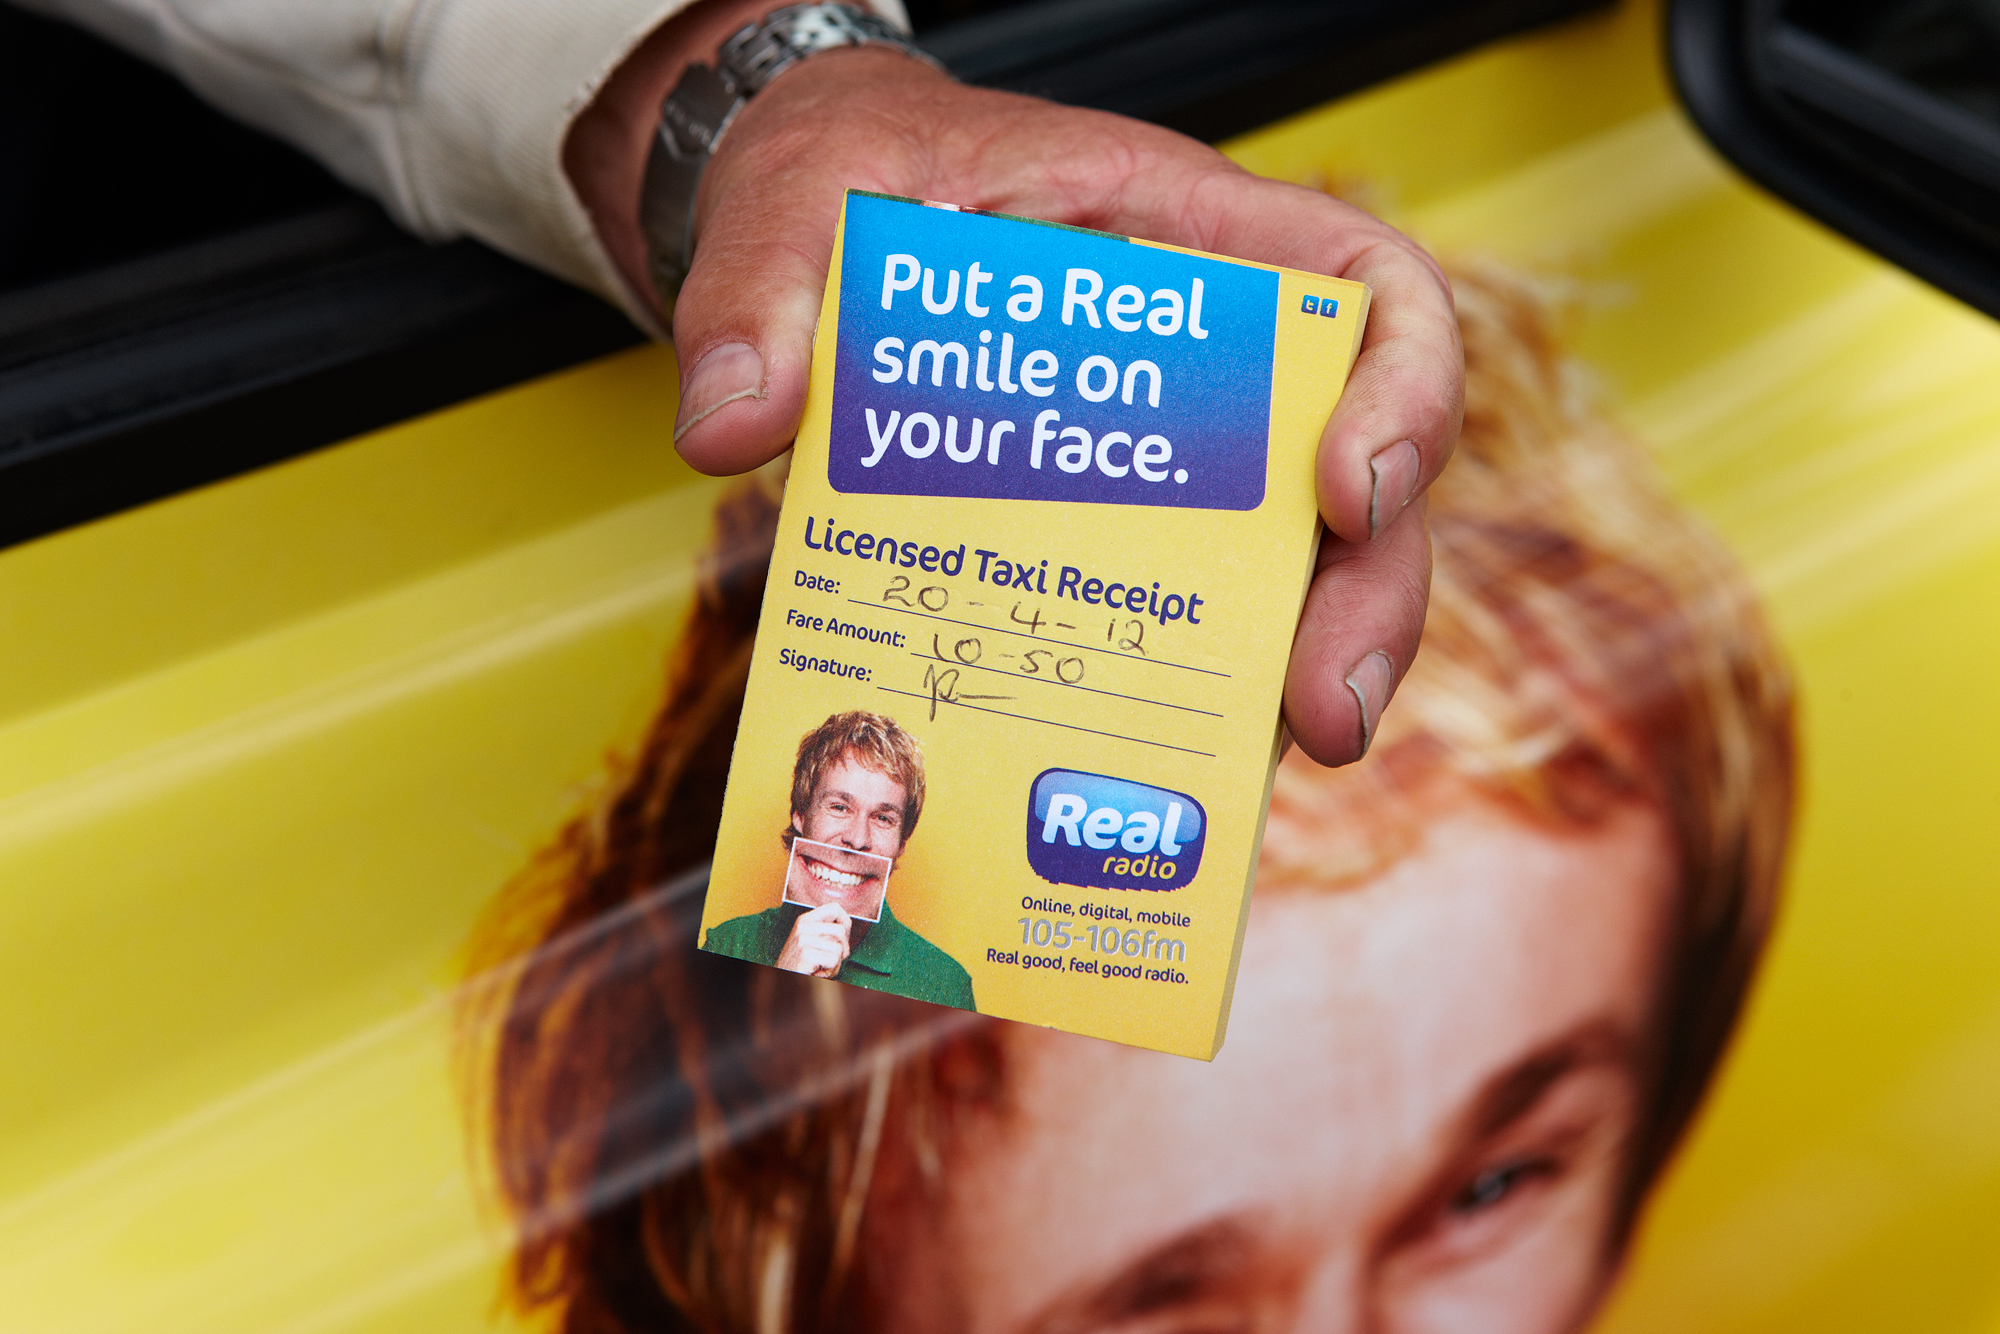 2012 Ubiquitous taxi advertising campaign for Real Radio - Put a Real Smile on your Face